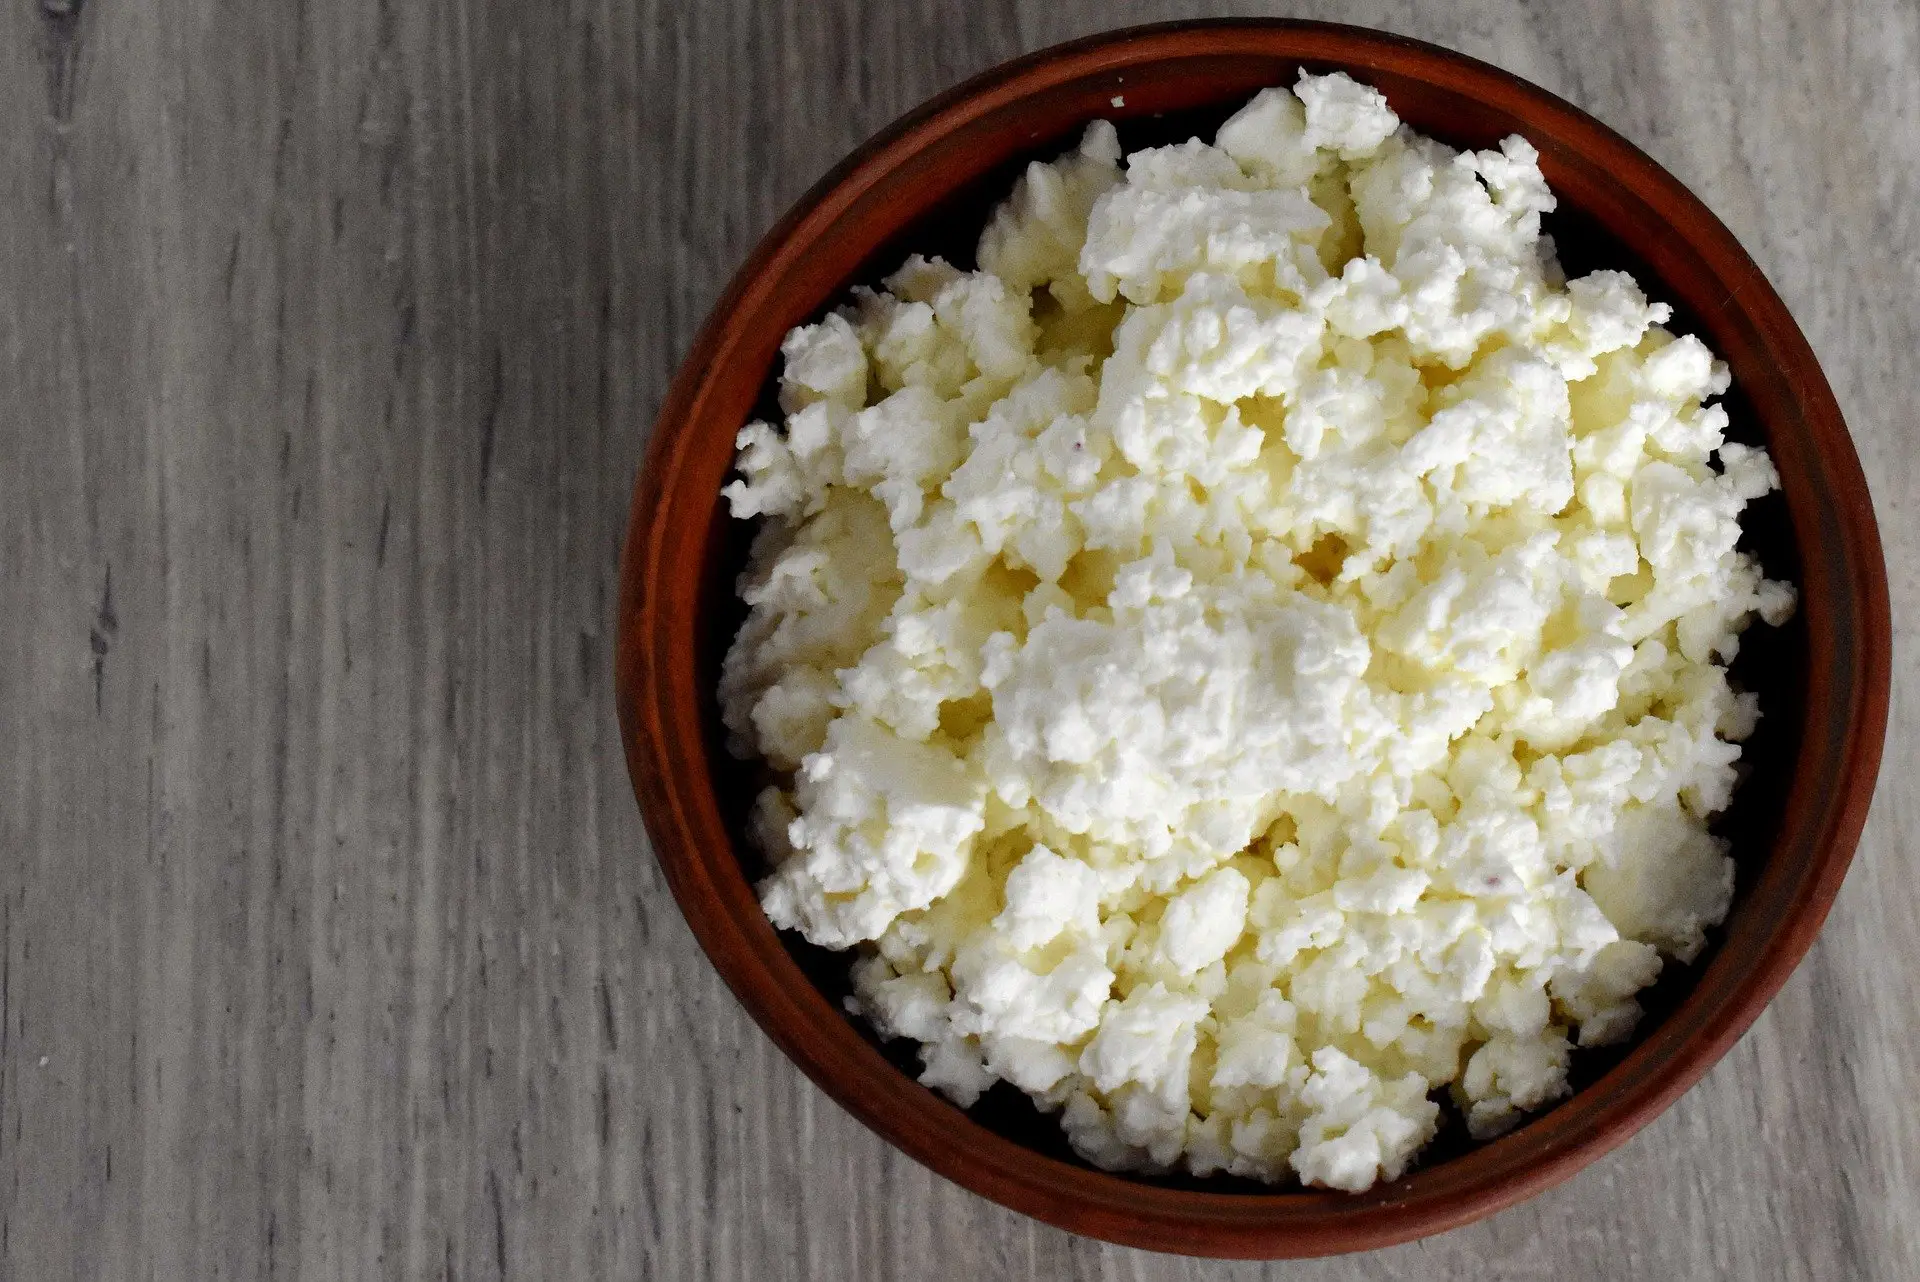 Is Cottage Cheese Good For Weight Loss?